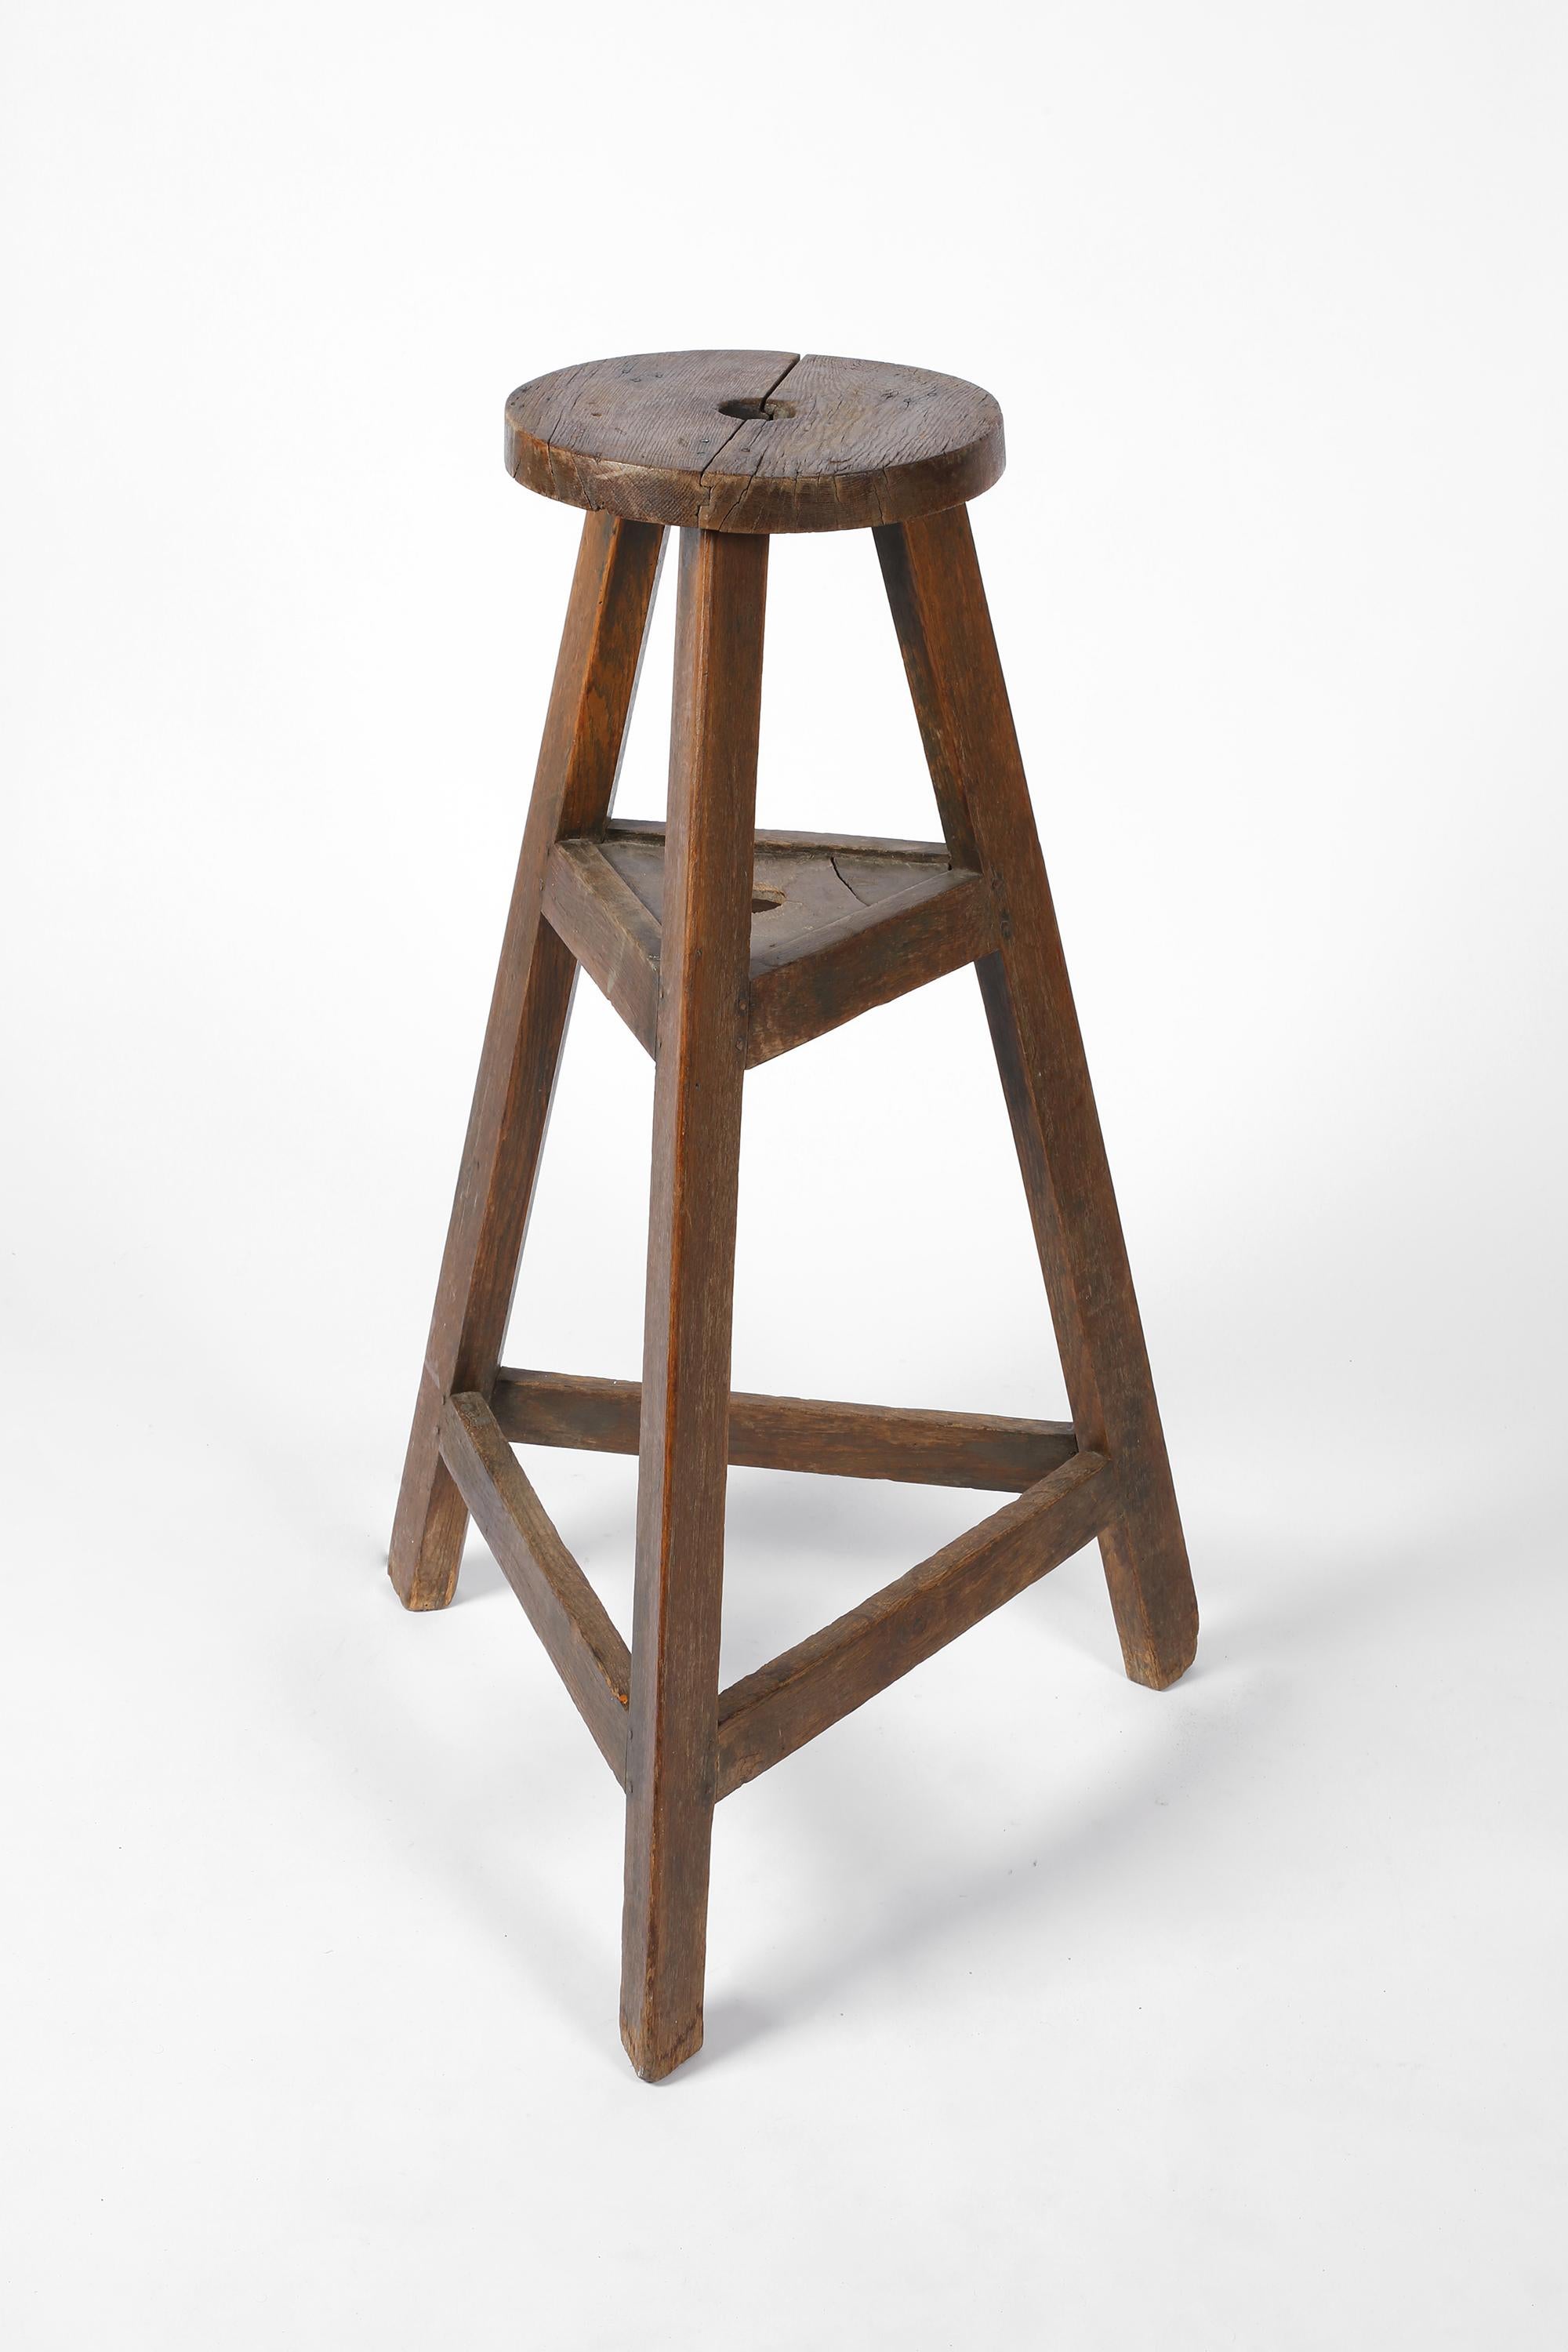 An early 20th century artists sculpture modelling stand in patinated oak. Missing its original top platform level, however still perfectly useable as a display plinth. French, c. 1900.